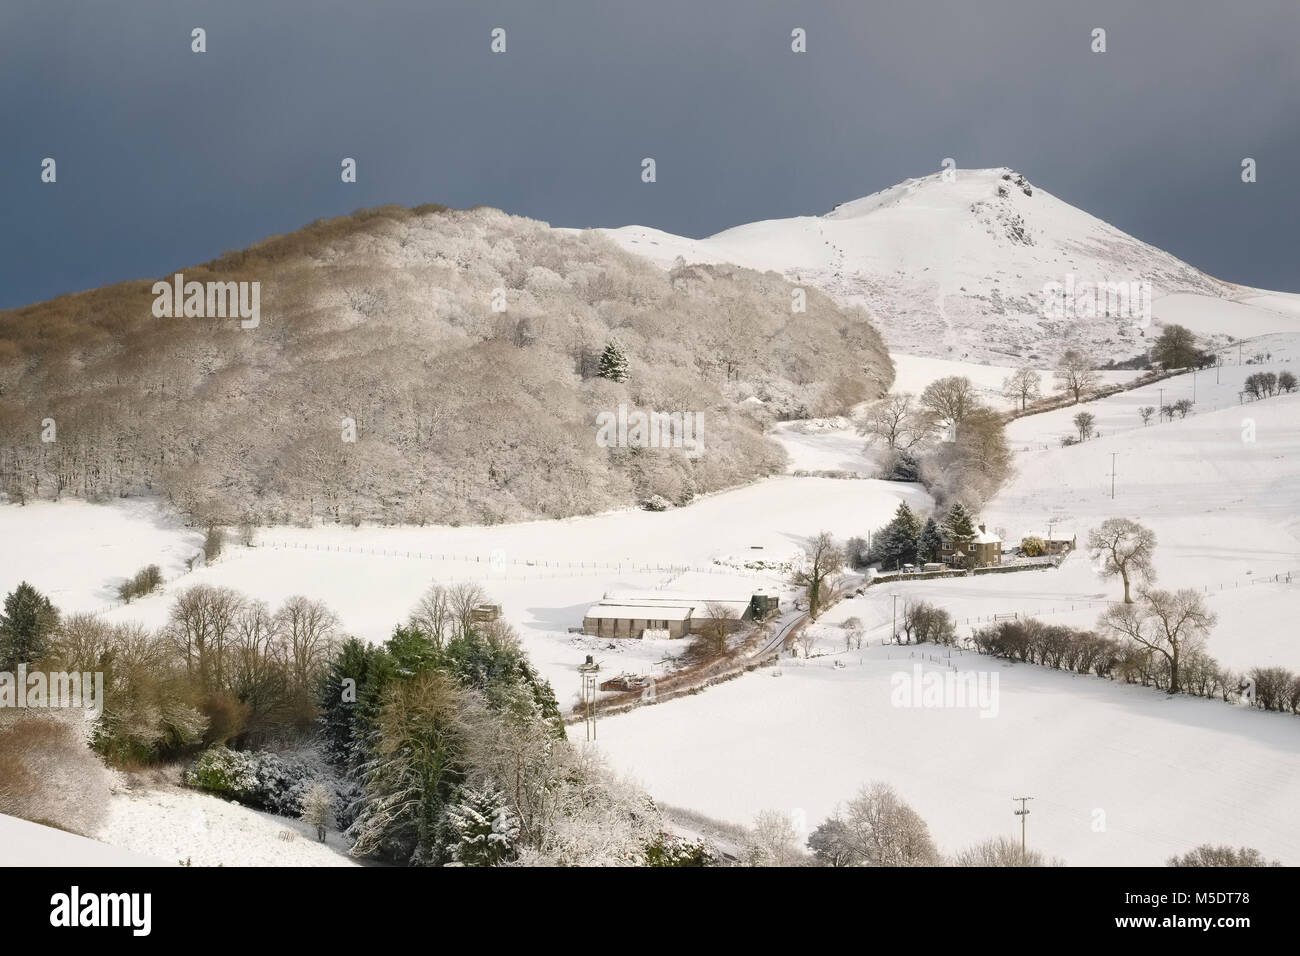 Helmeth Hill and Caer Caradoc hill seen from seen Hazler Hill covered in snow in winter, Church Stretton, Shropshire, UK Stock Photo